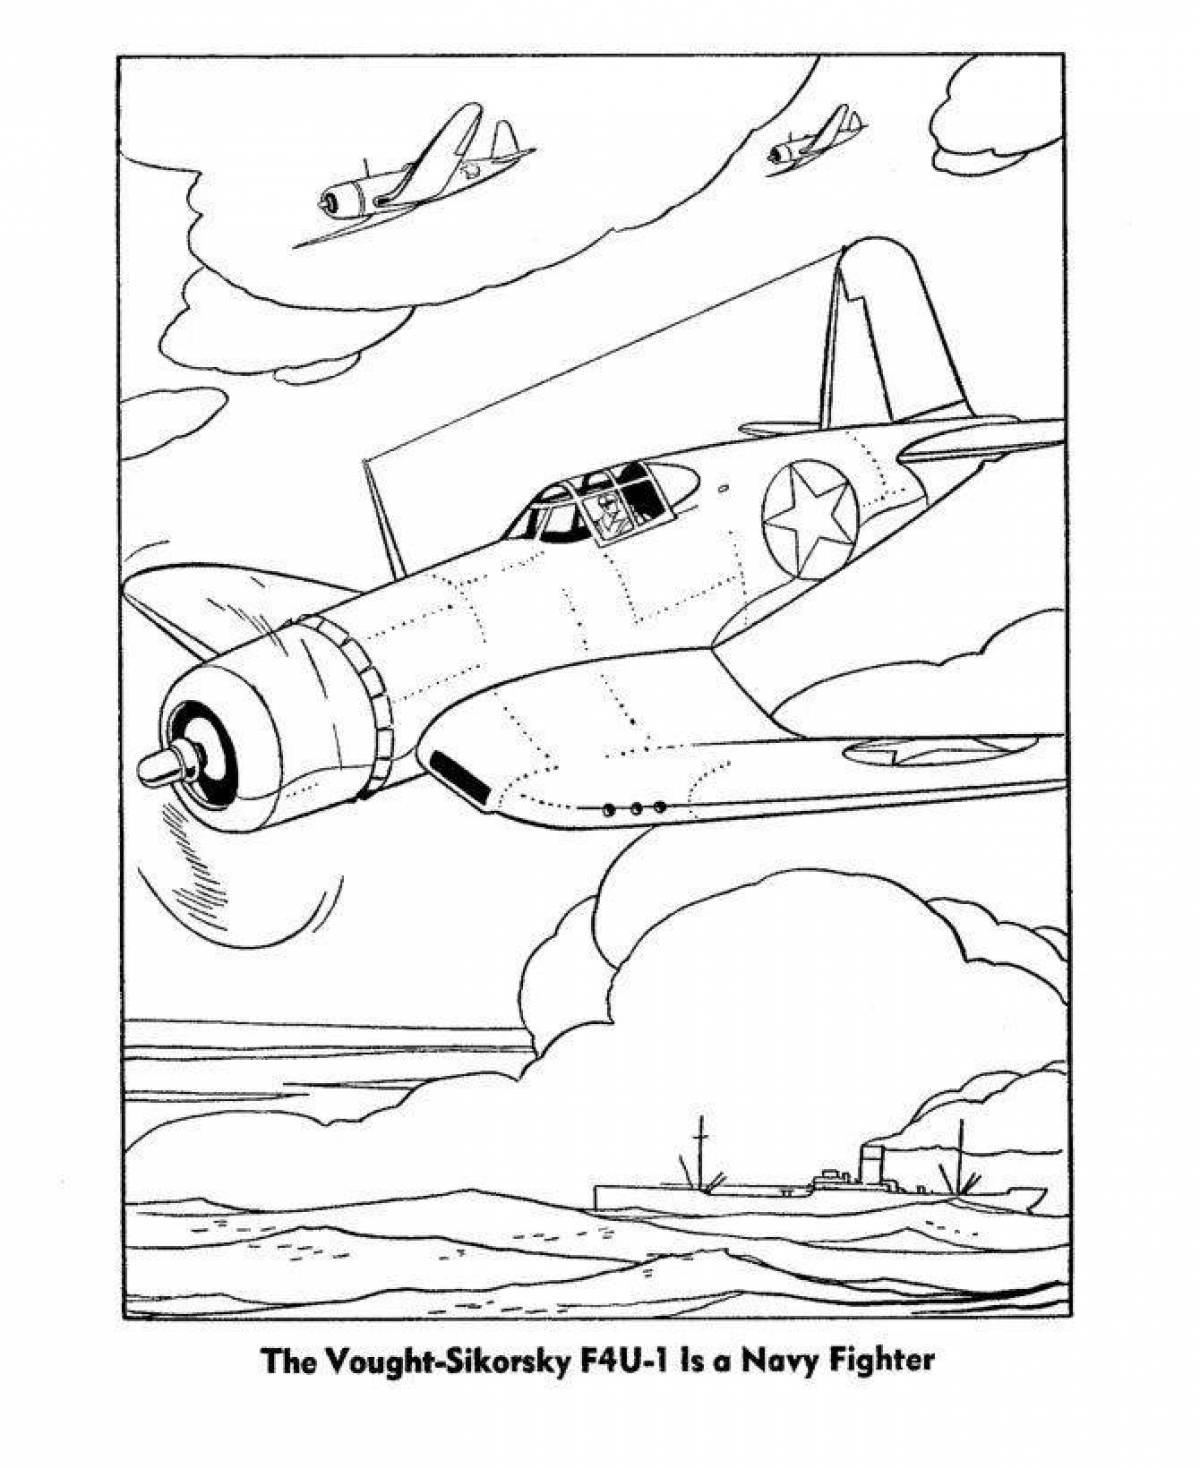 A terrible war coloring page